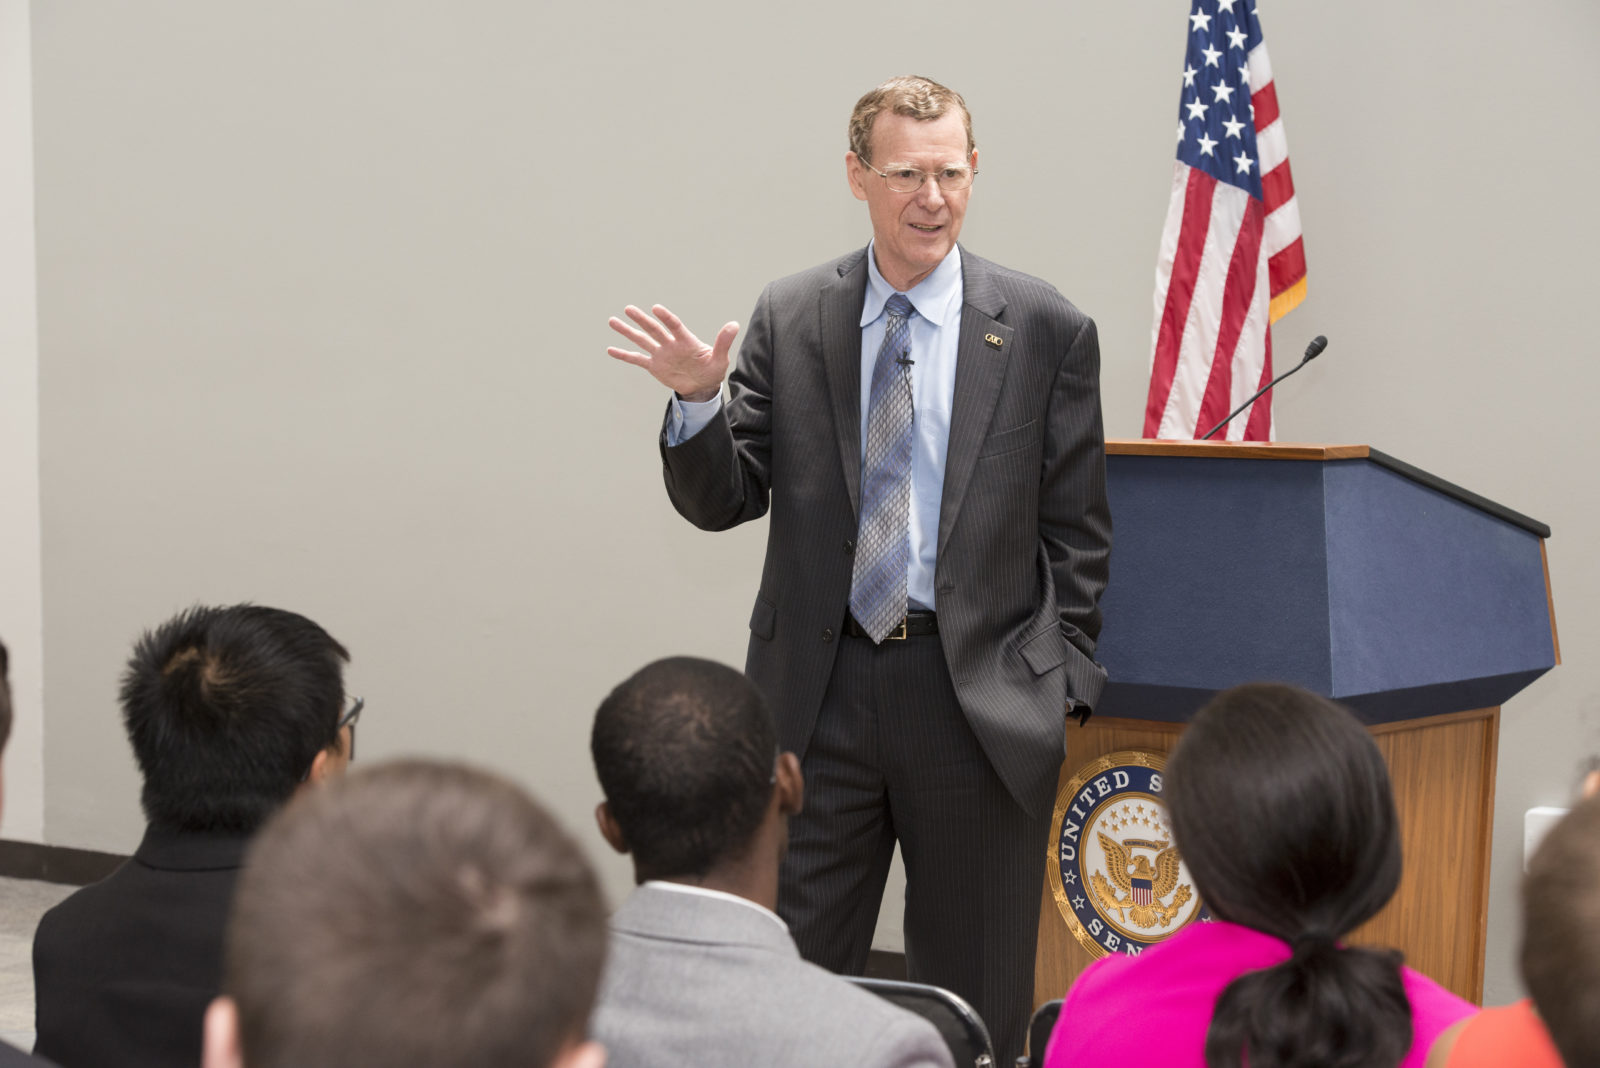 John Allison, president of the Cato Institute, speaks to students about the pursuit of happiness and human flourishing on June 25 at the Hart Senate Office Building